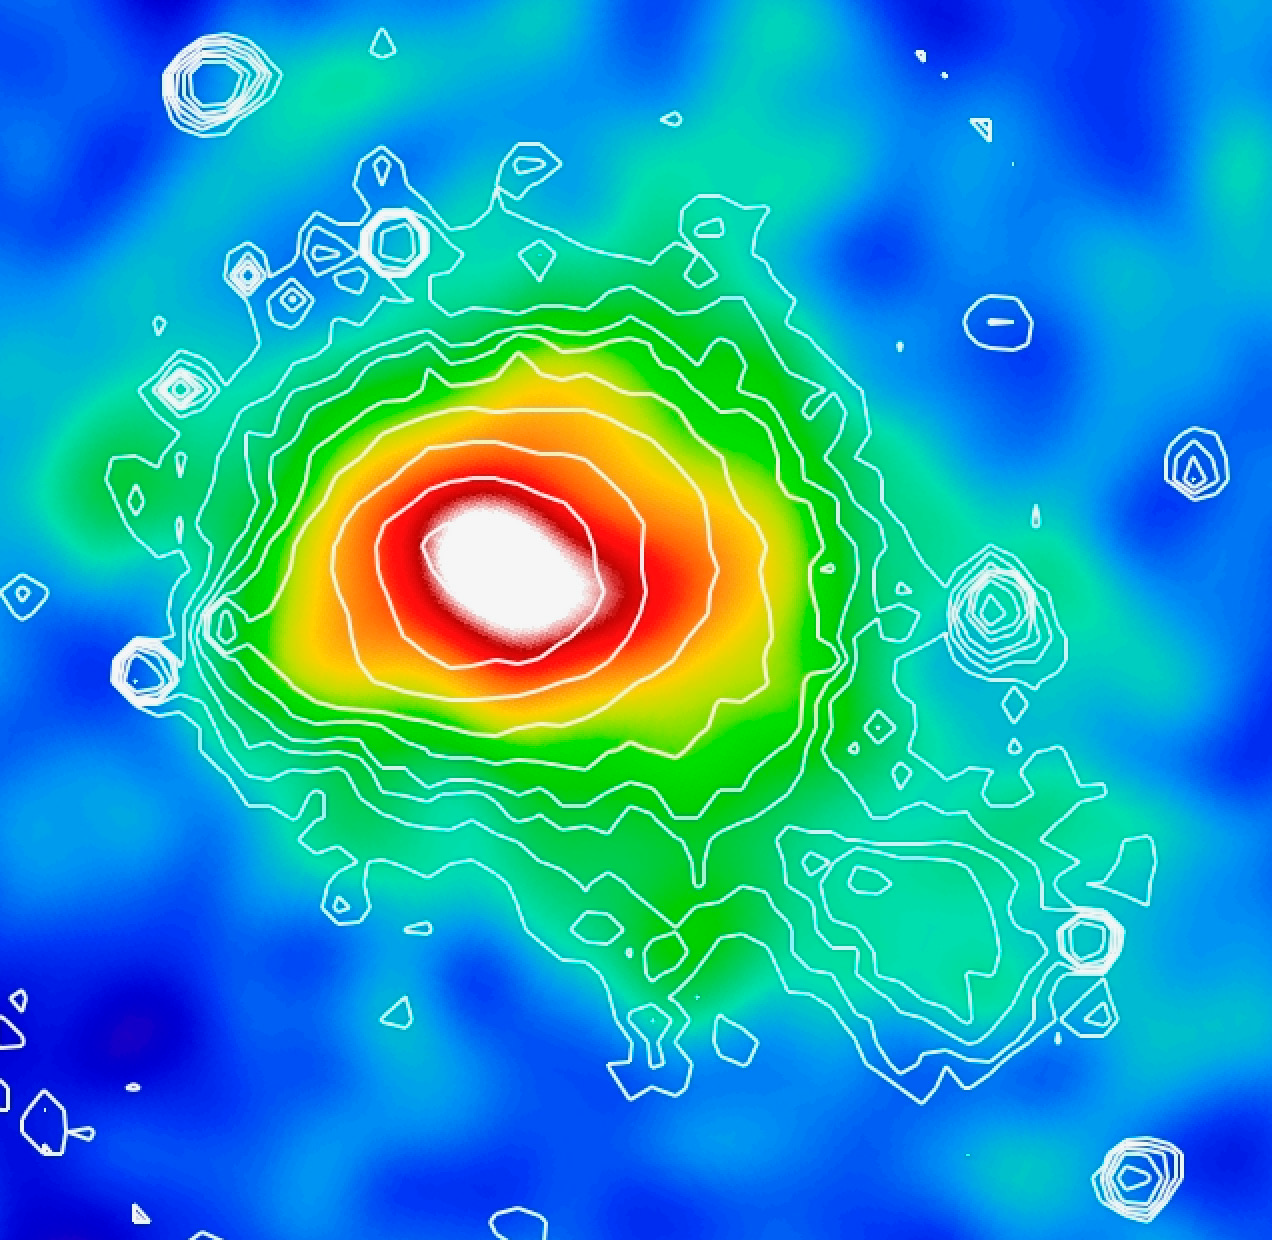 Planck map of the Sunyaev-Zeldovich effect signal with ROSAT X-ray overlaid contours of the Coma cluster